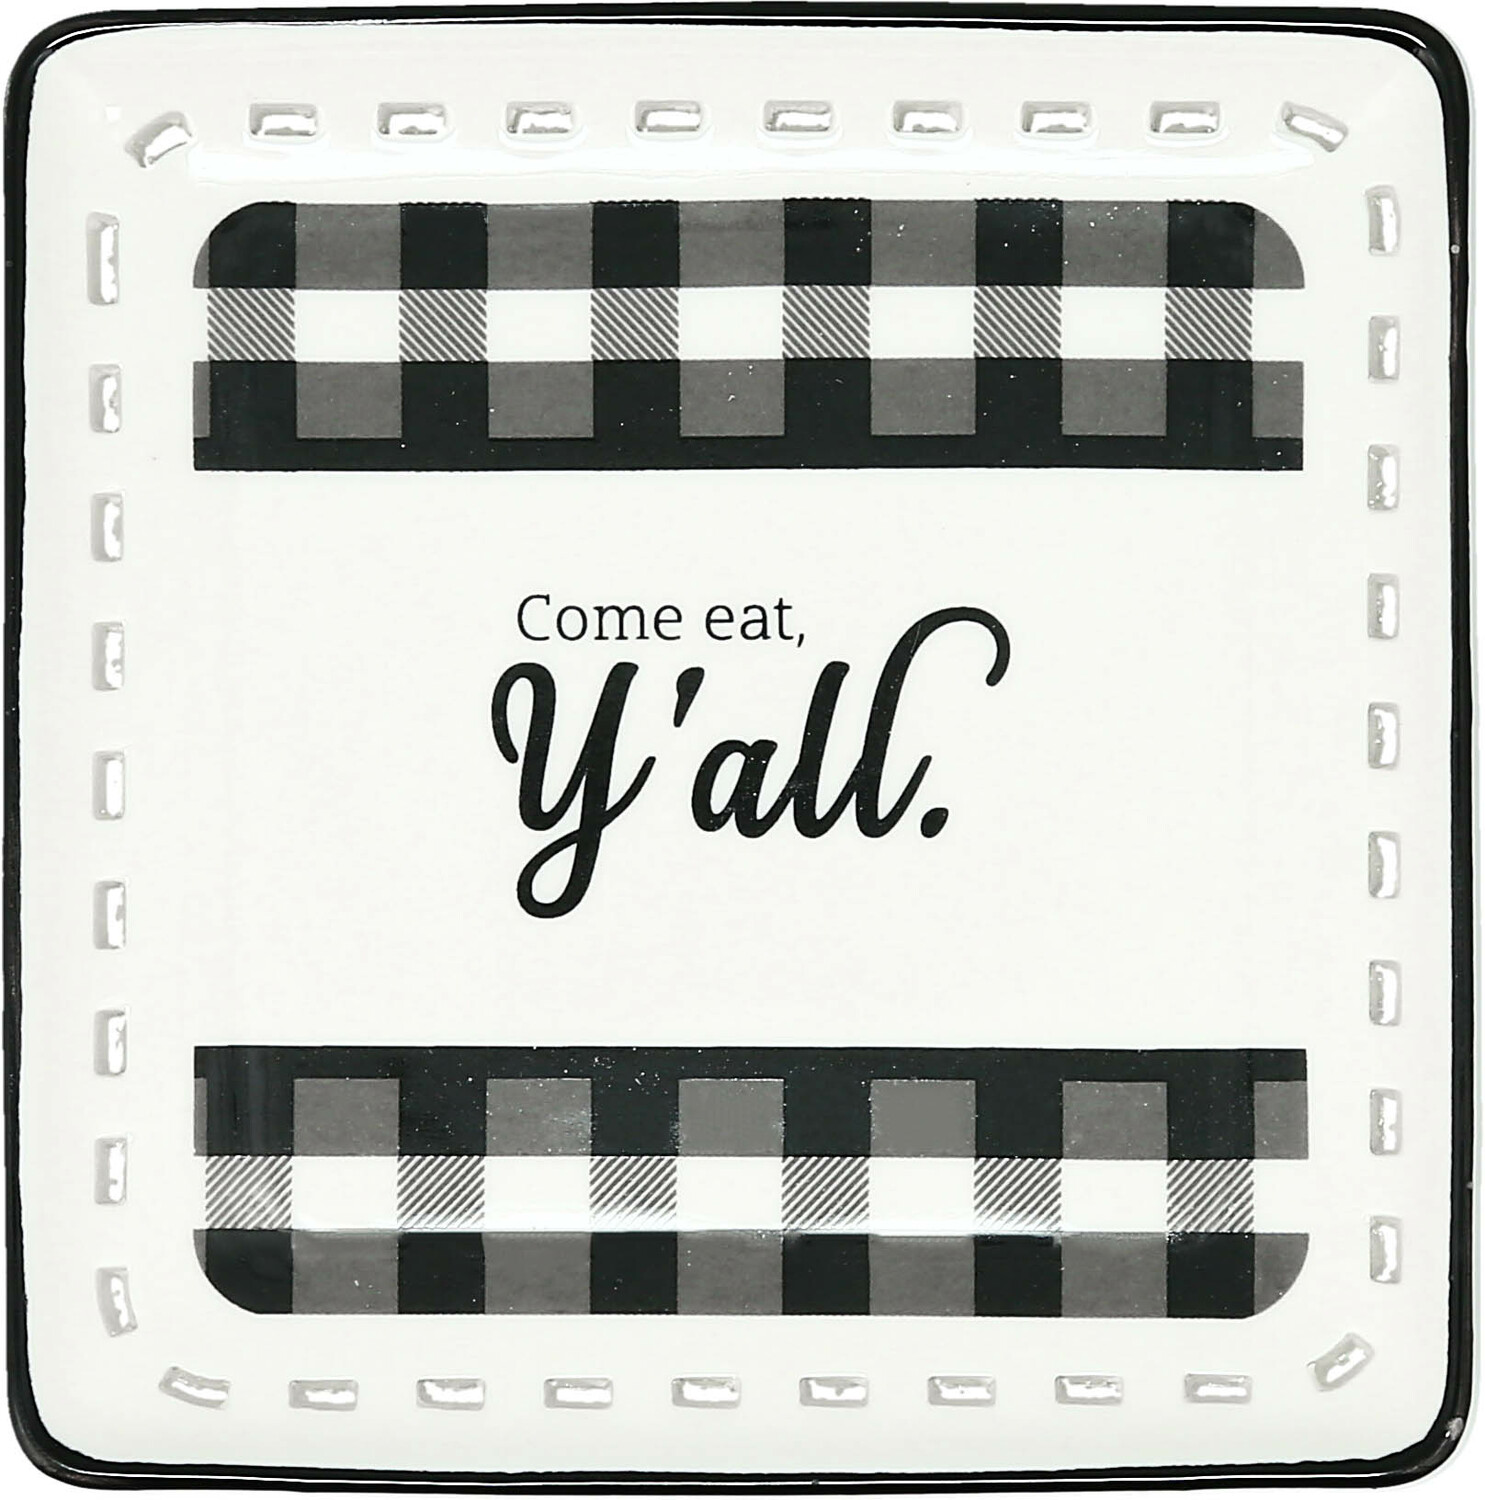 Y'all by Farmhouse Family - Y'all - 5" Appetizer Plate